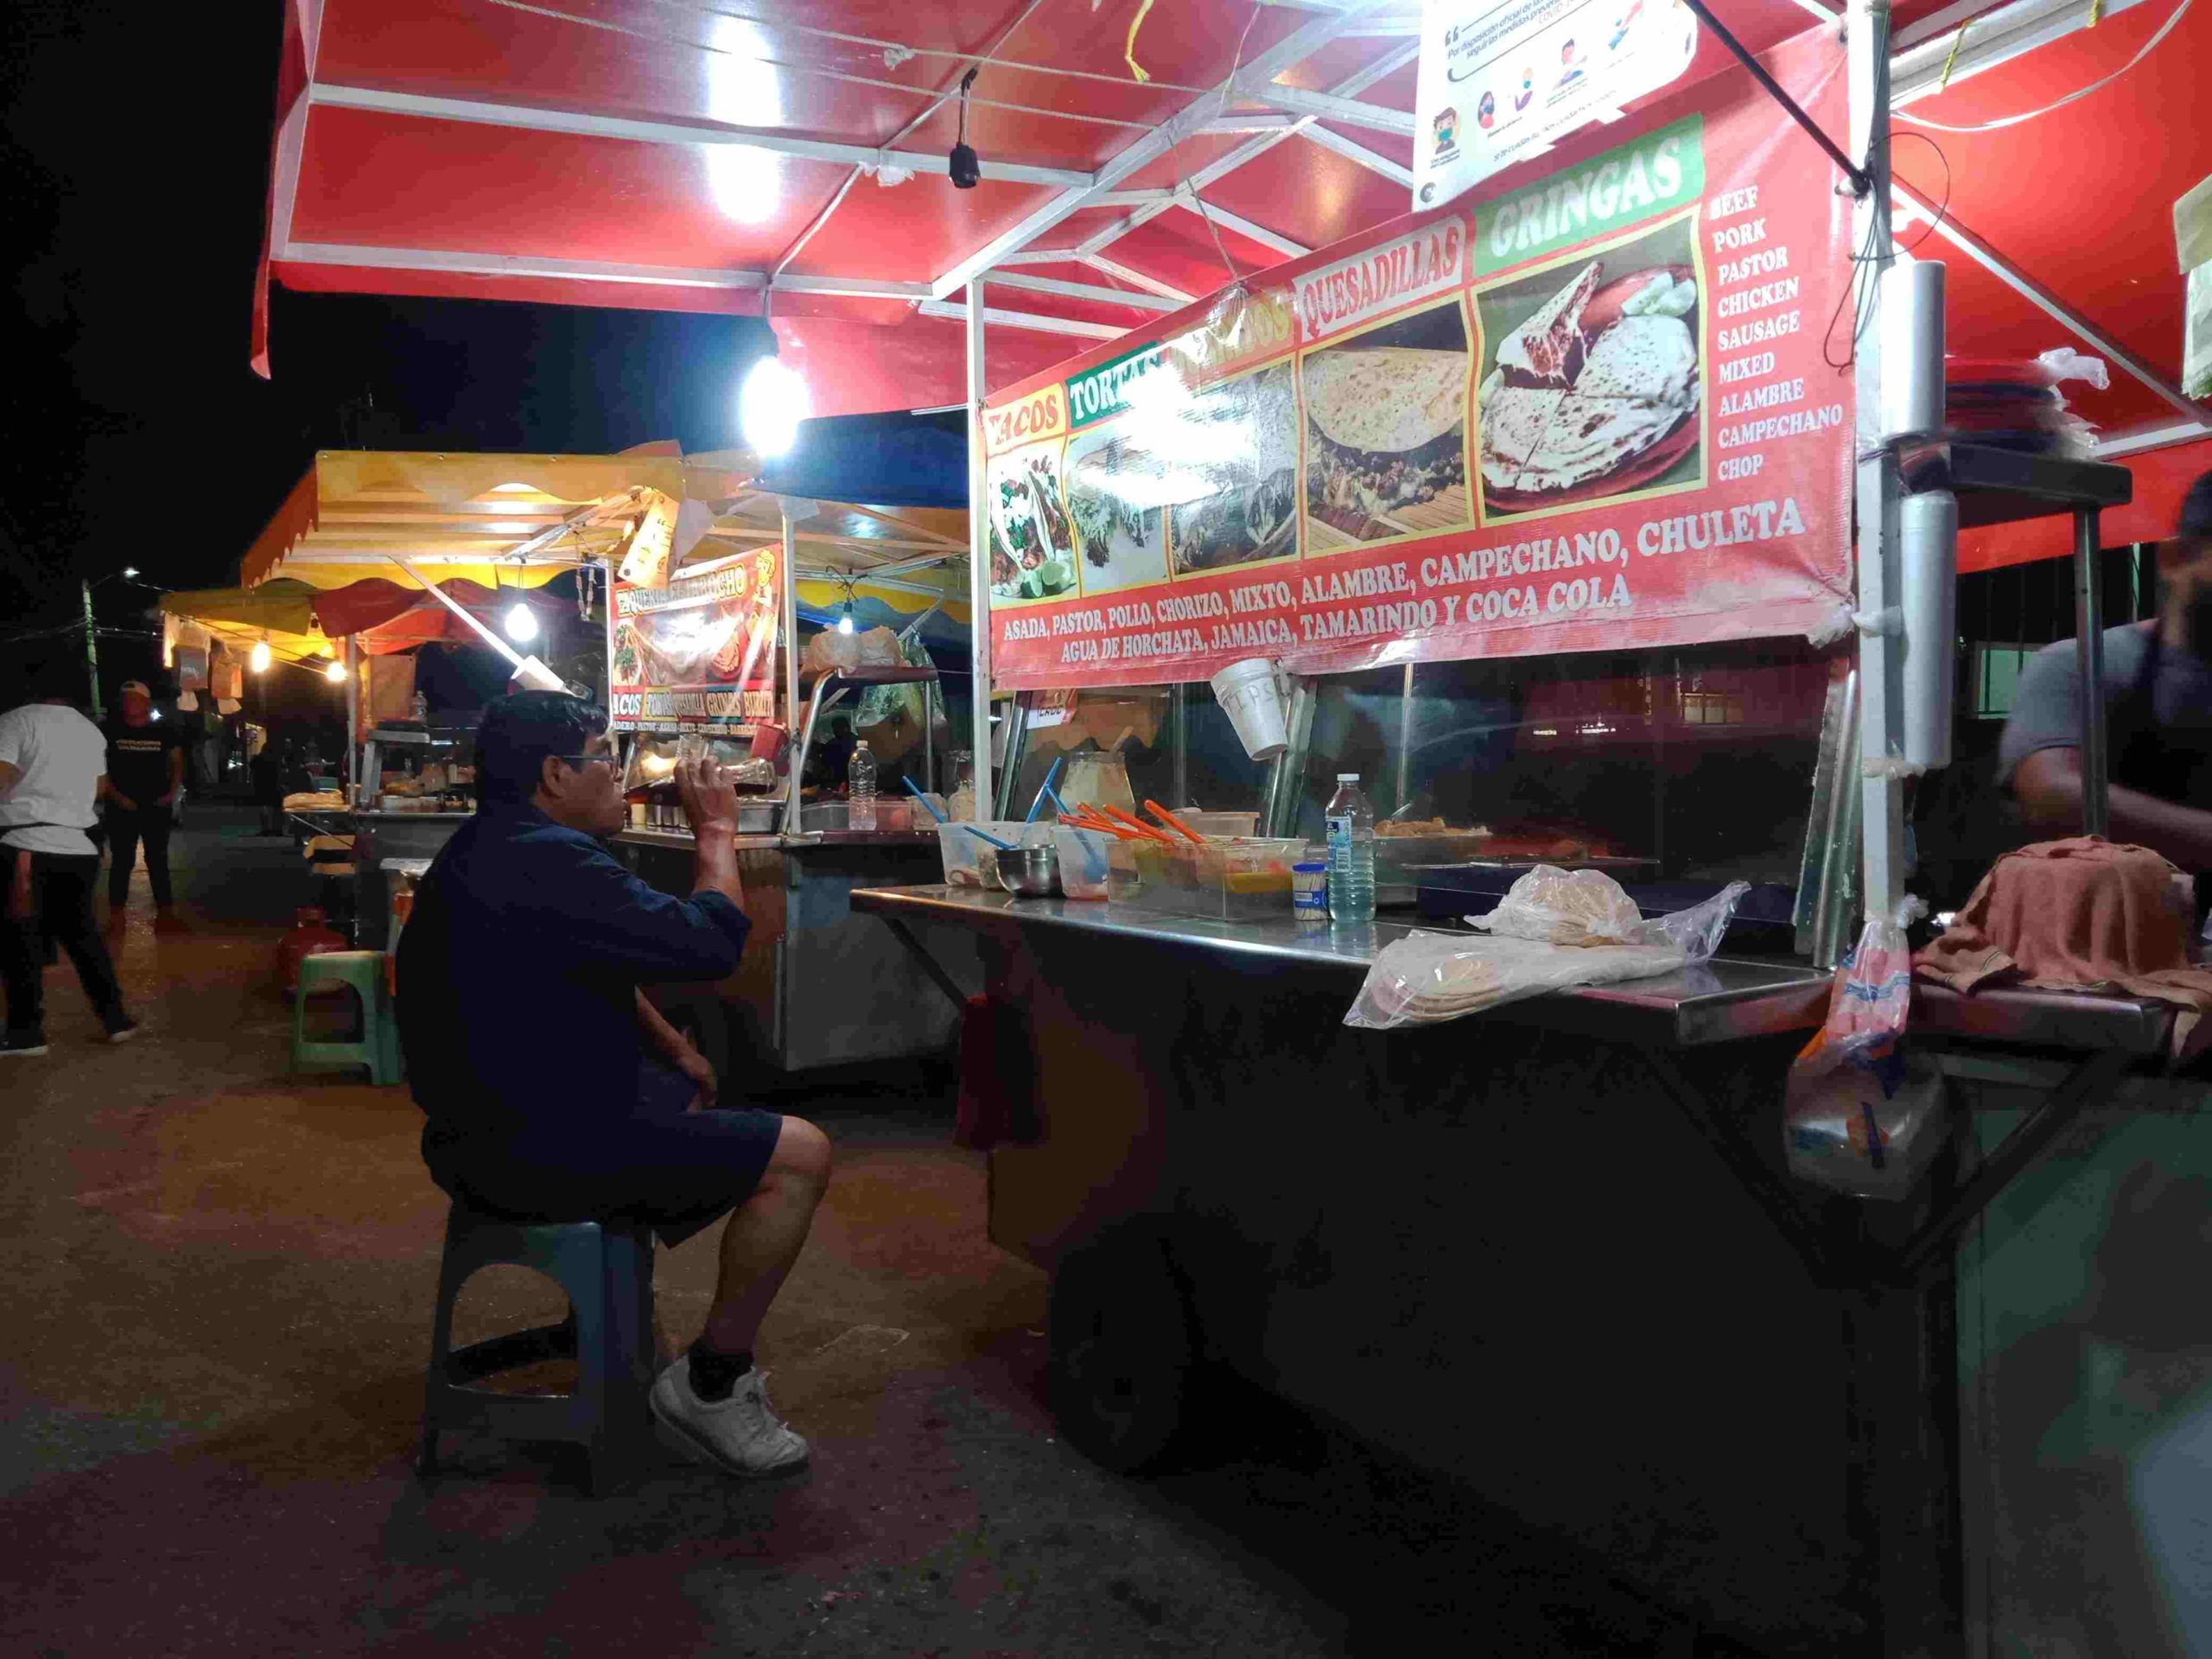 Typical street food stalls in Playa. Costs from 2$ US